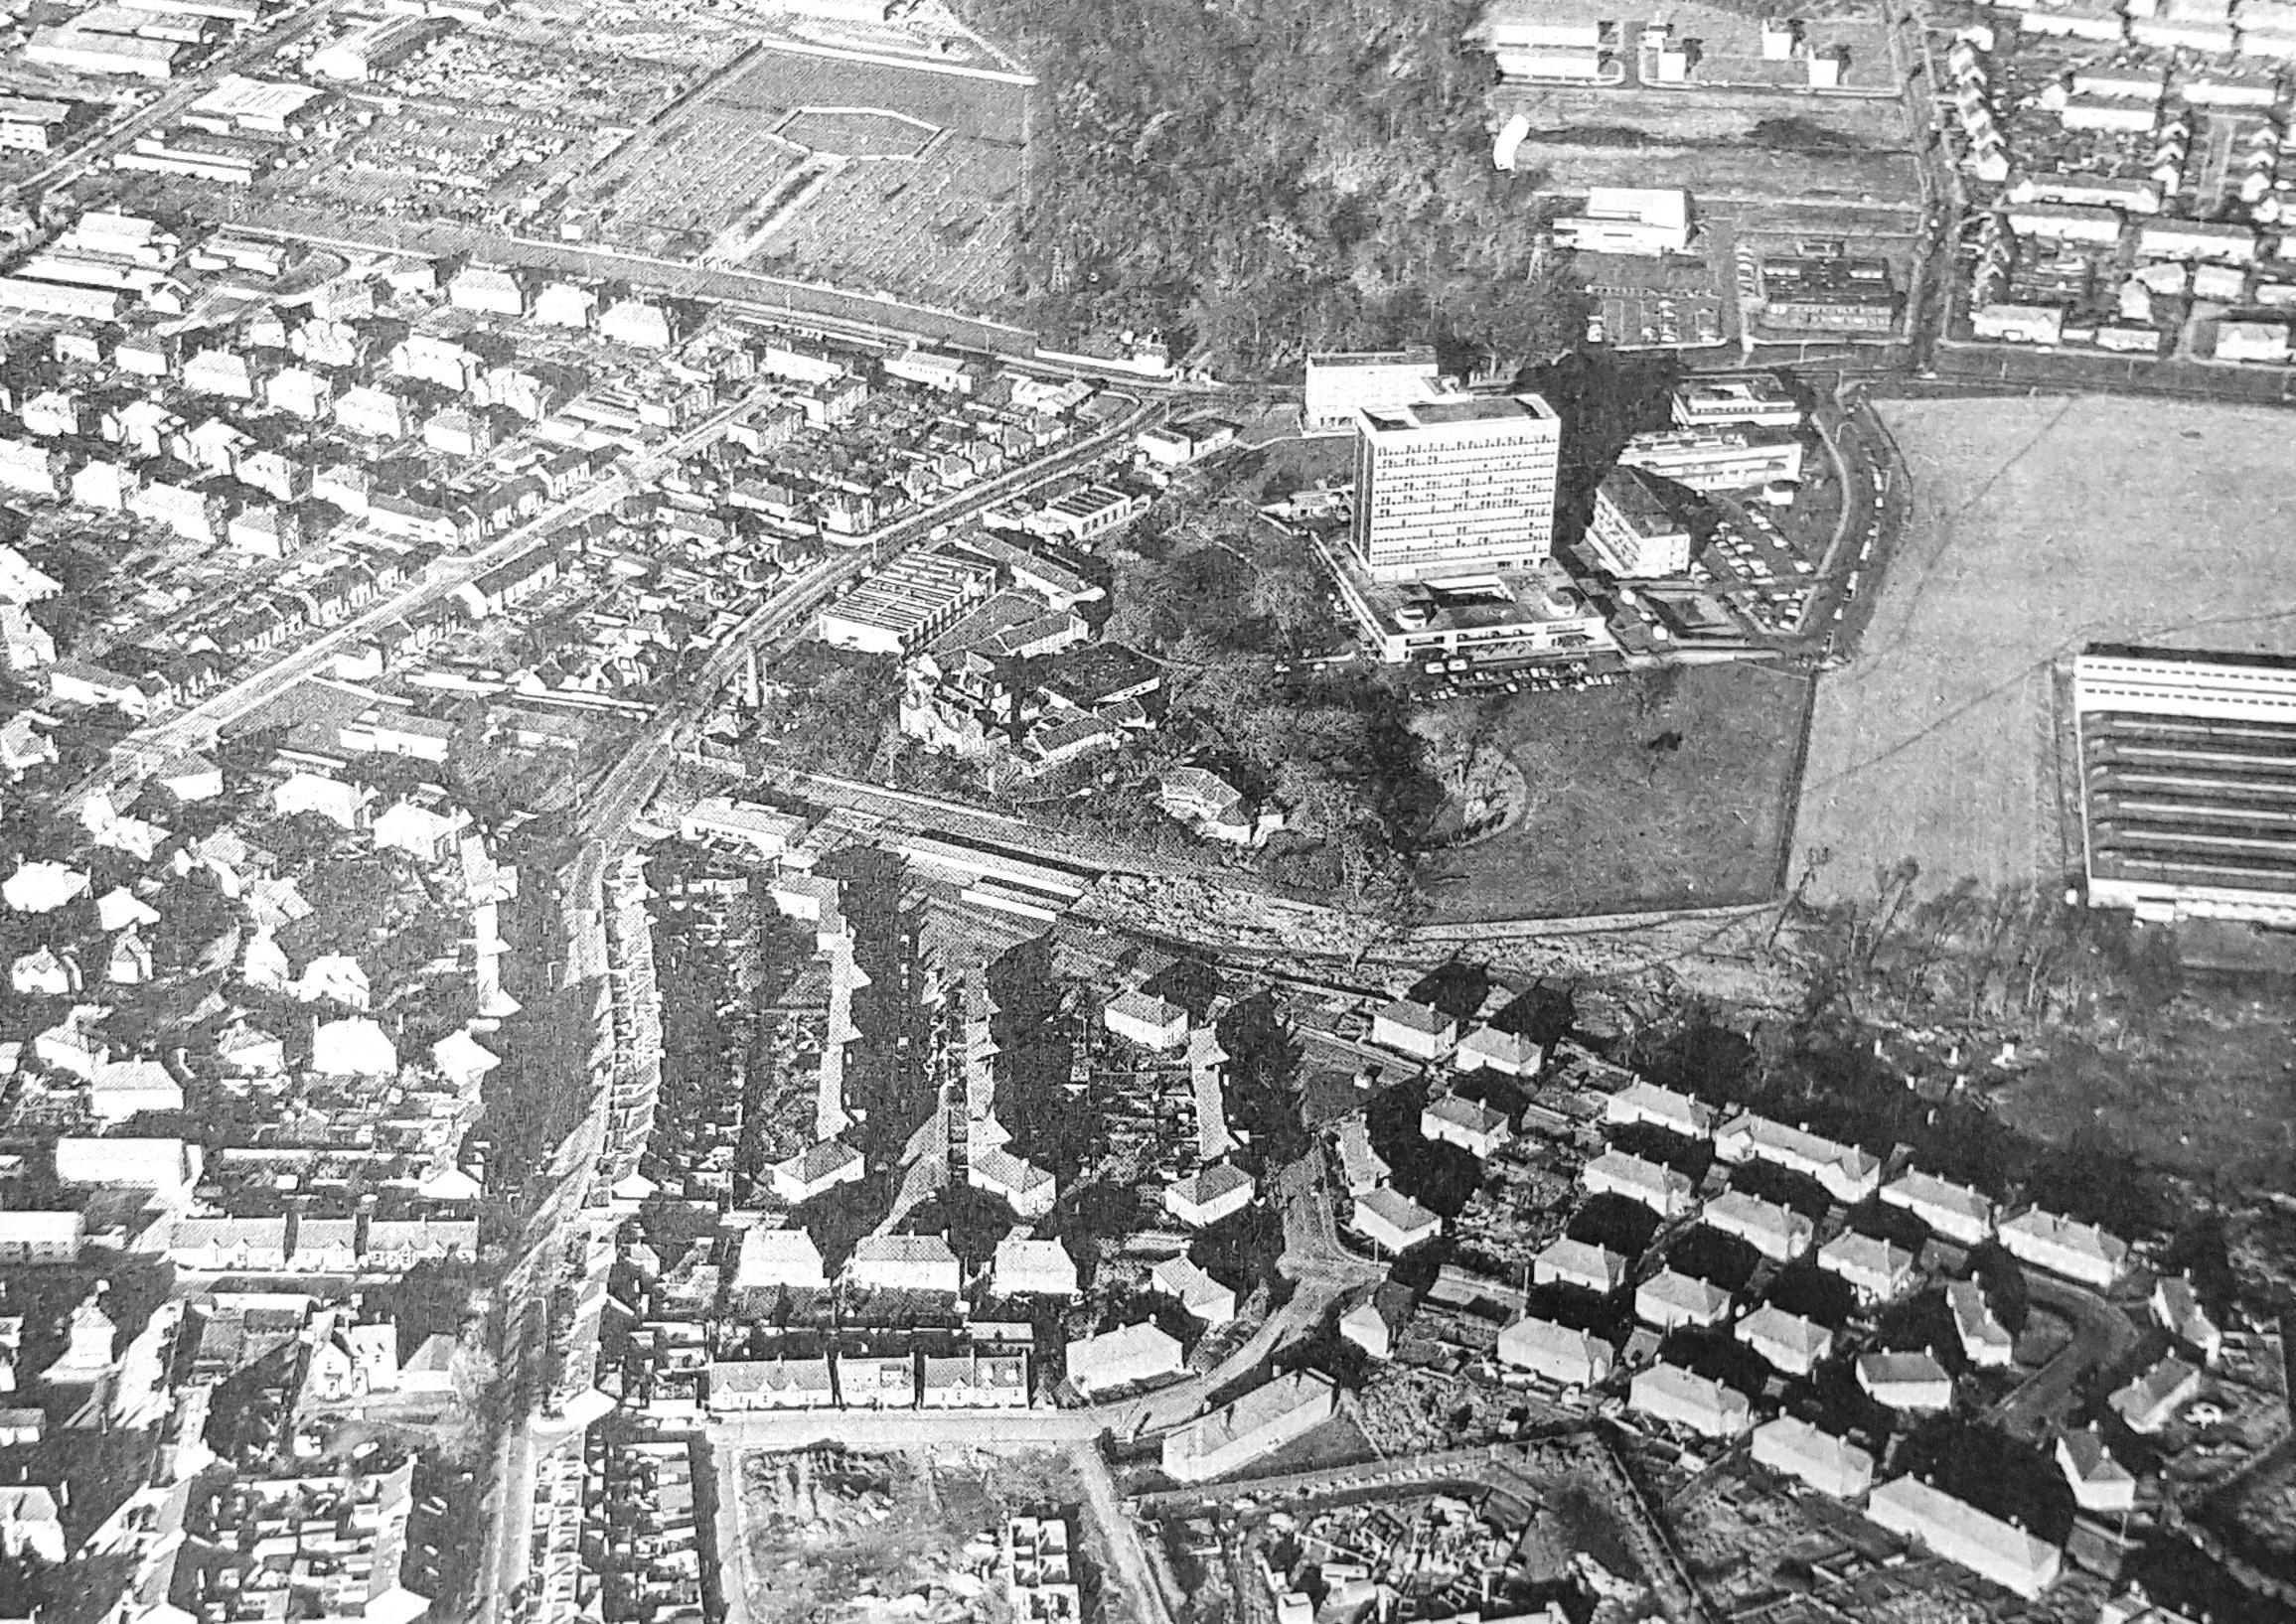 Victoria Hospital lies at the centre of this picture. The grassy area to the right is now home to the Victoria Gate housing estate whilst Dunnikier Road runs up to the left.